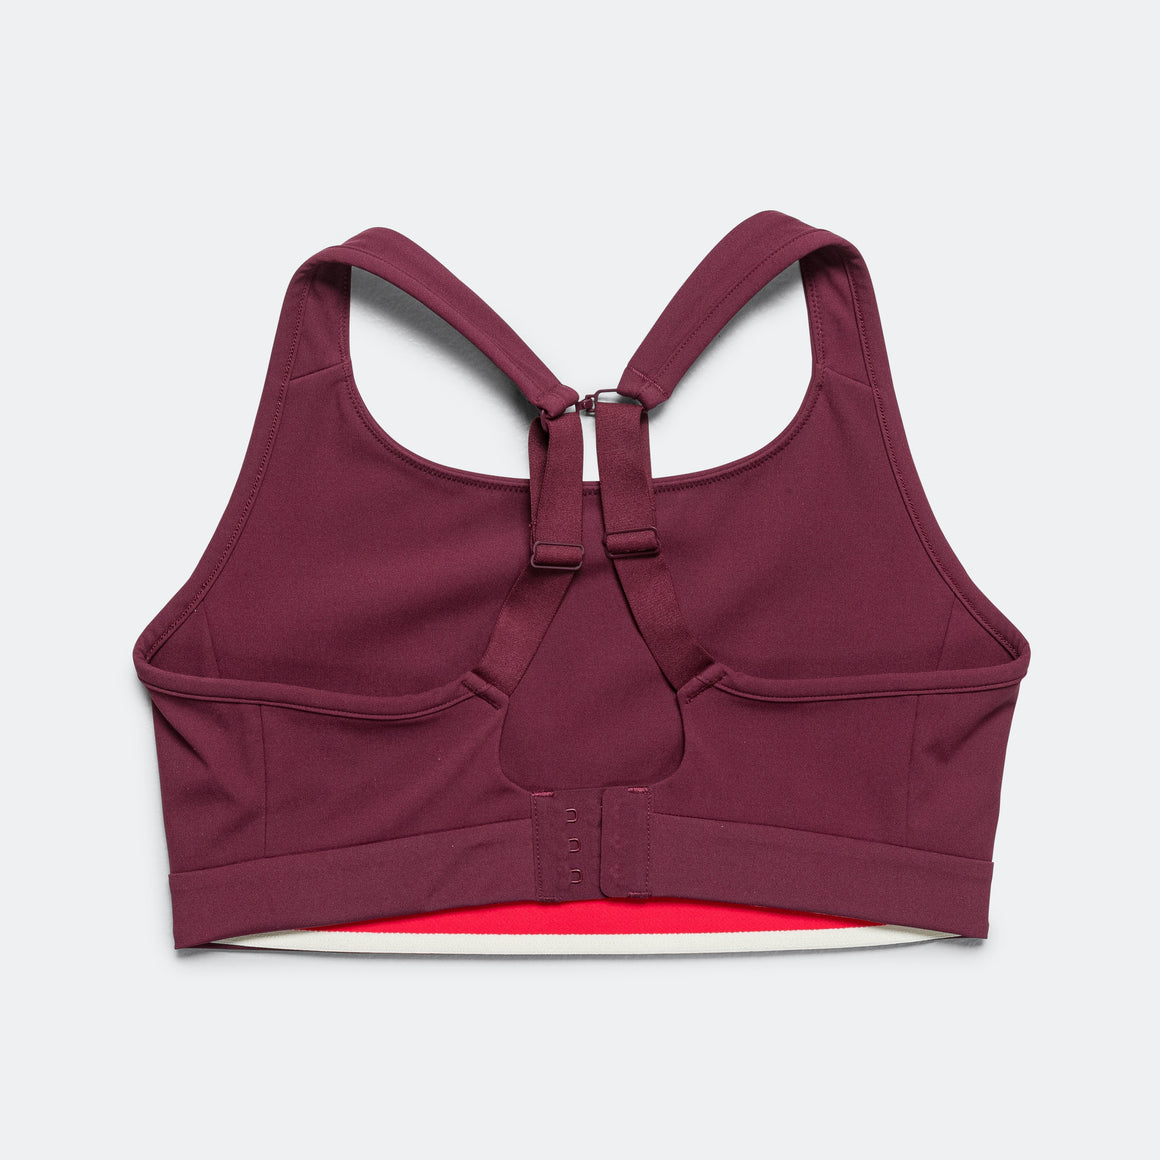 Tracksmith - Womens Allston Adjustable Support Bra - Berry - Up There Athletics